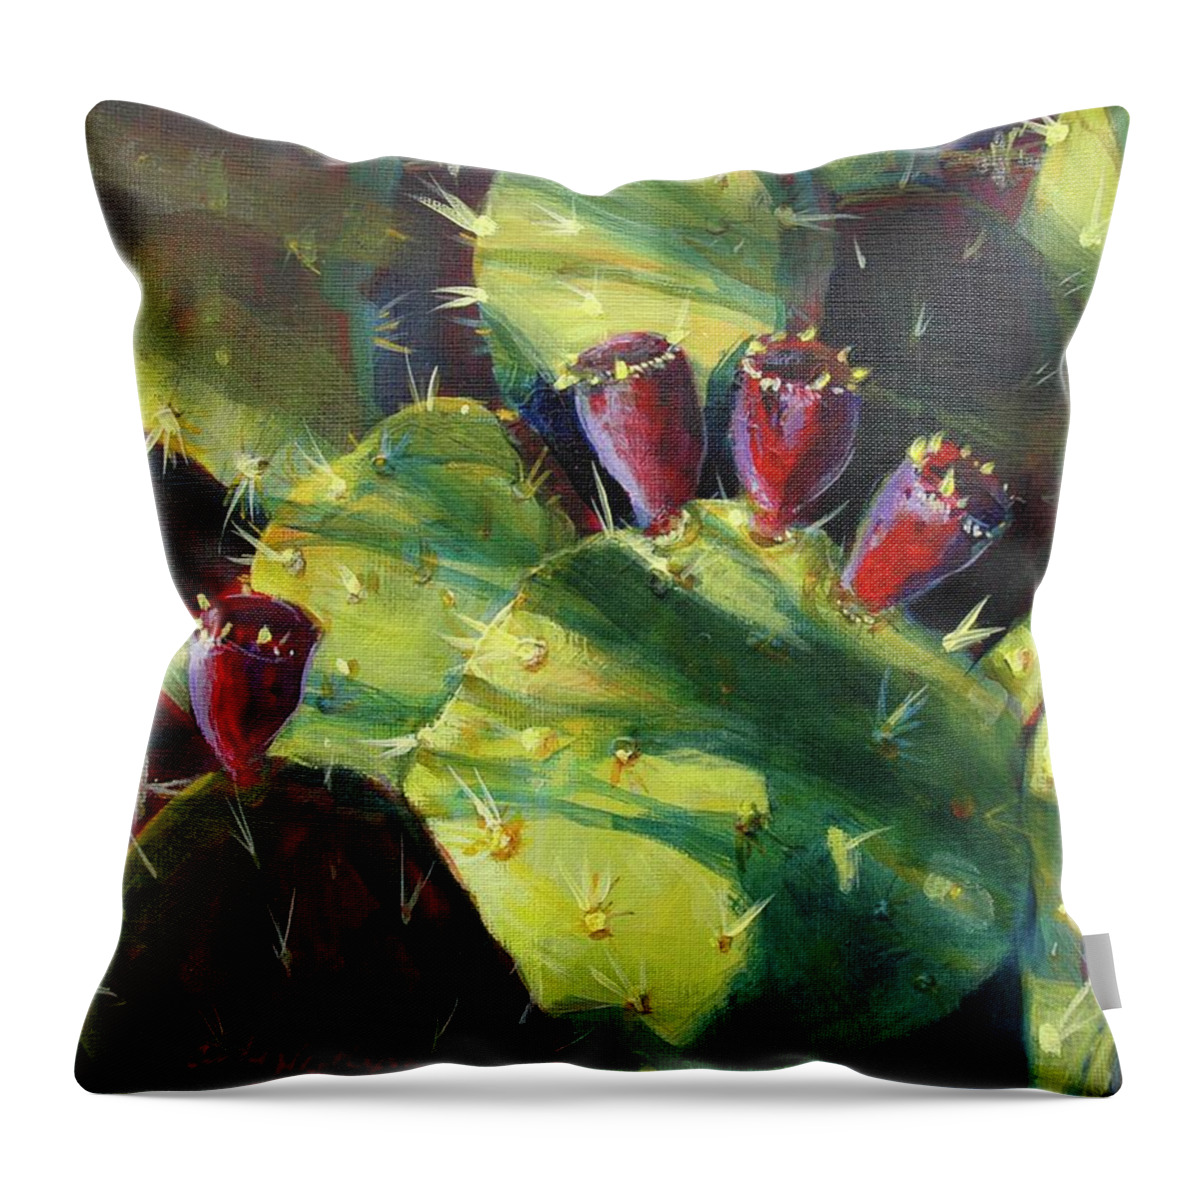 Art Throw Pillow featuring the painting Cactus Shadows by Cynthia Westbrook